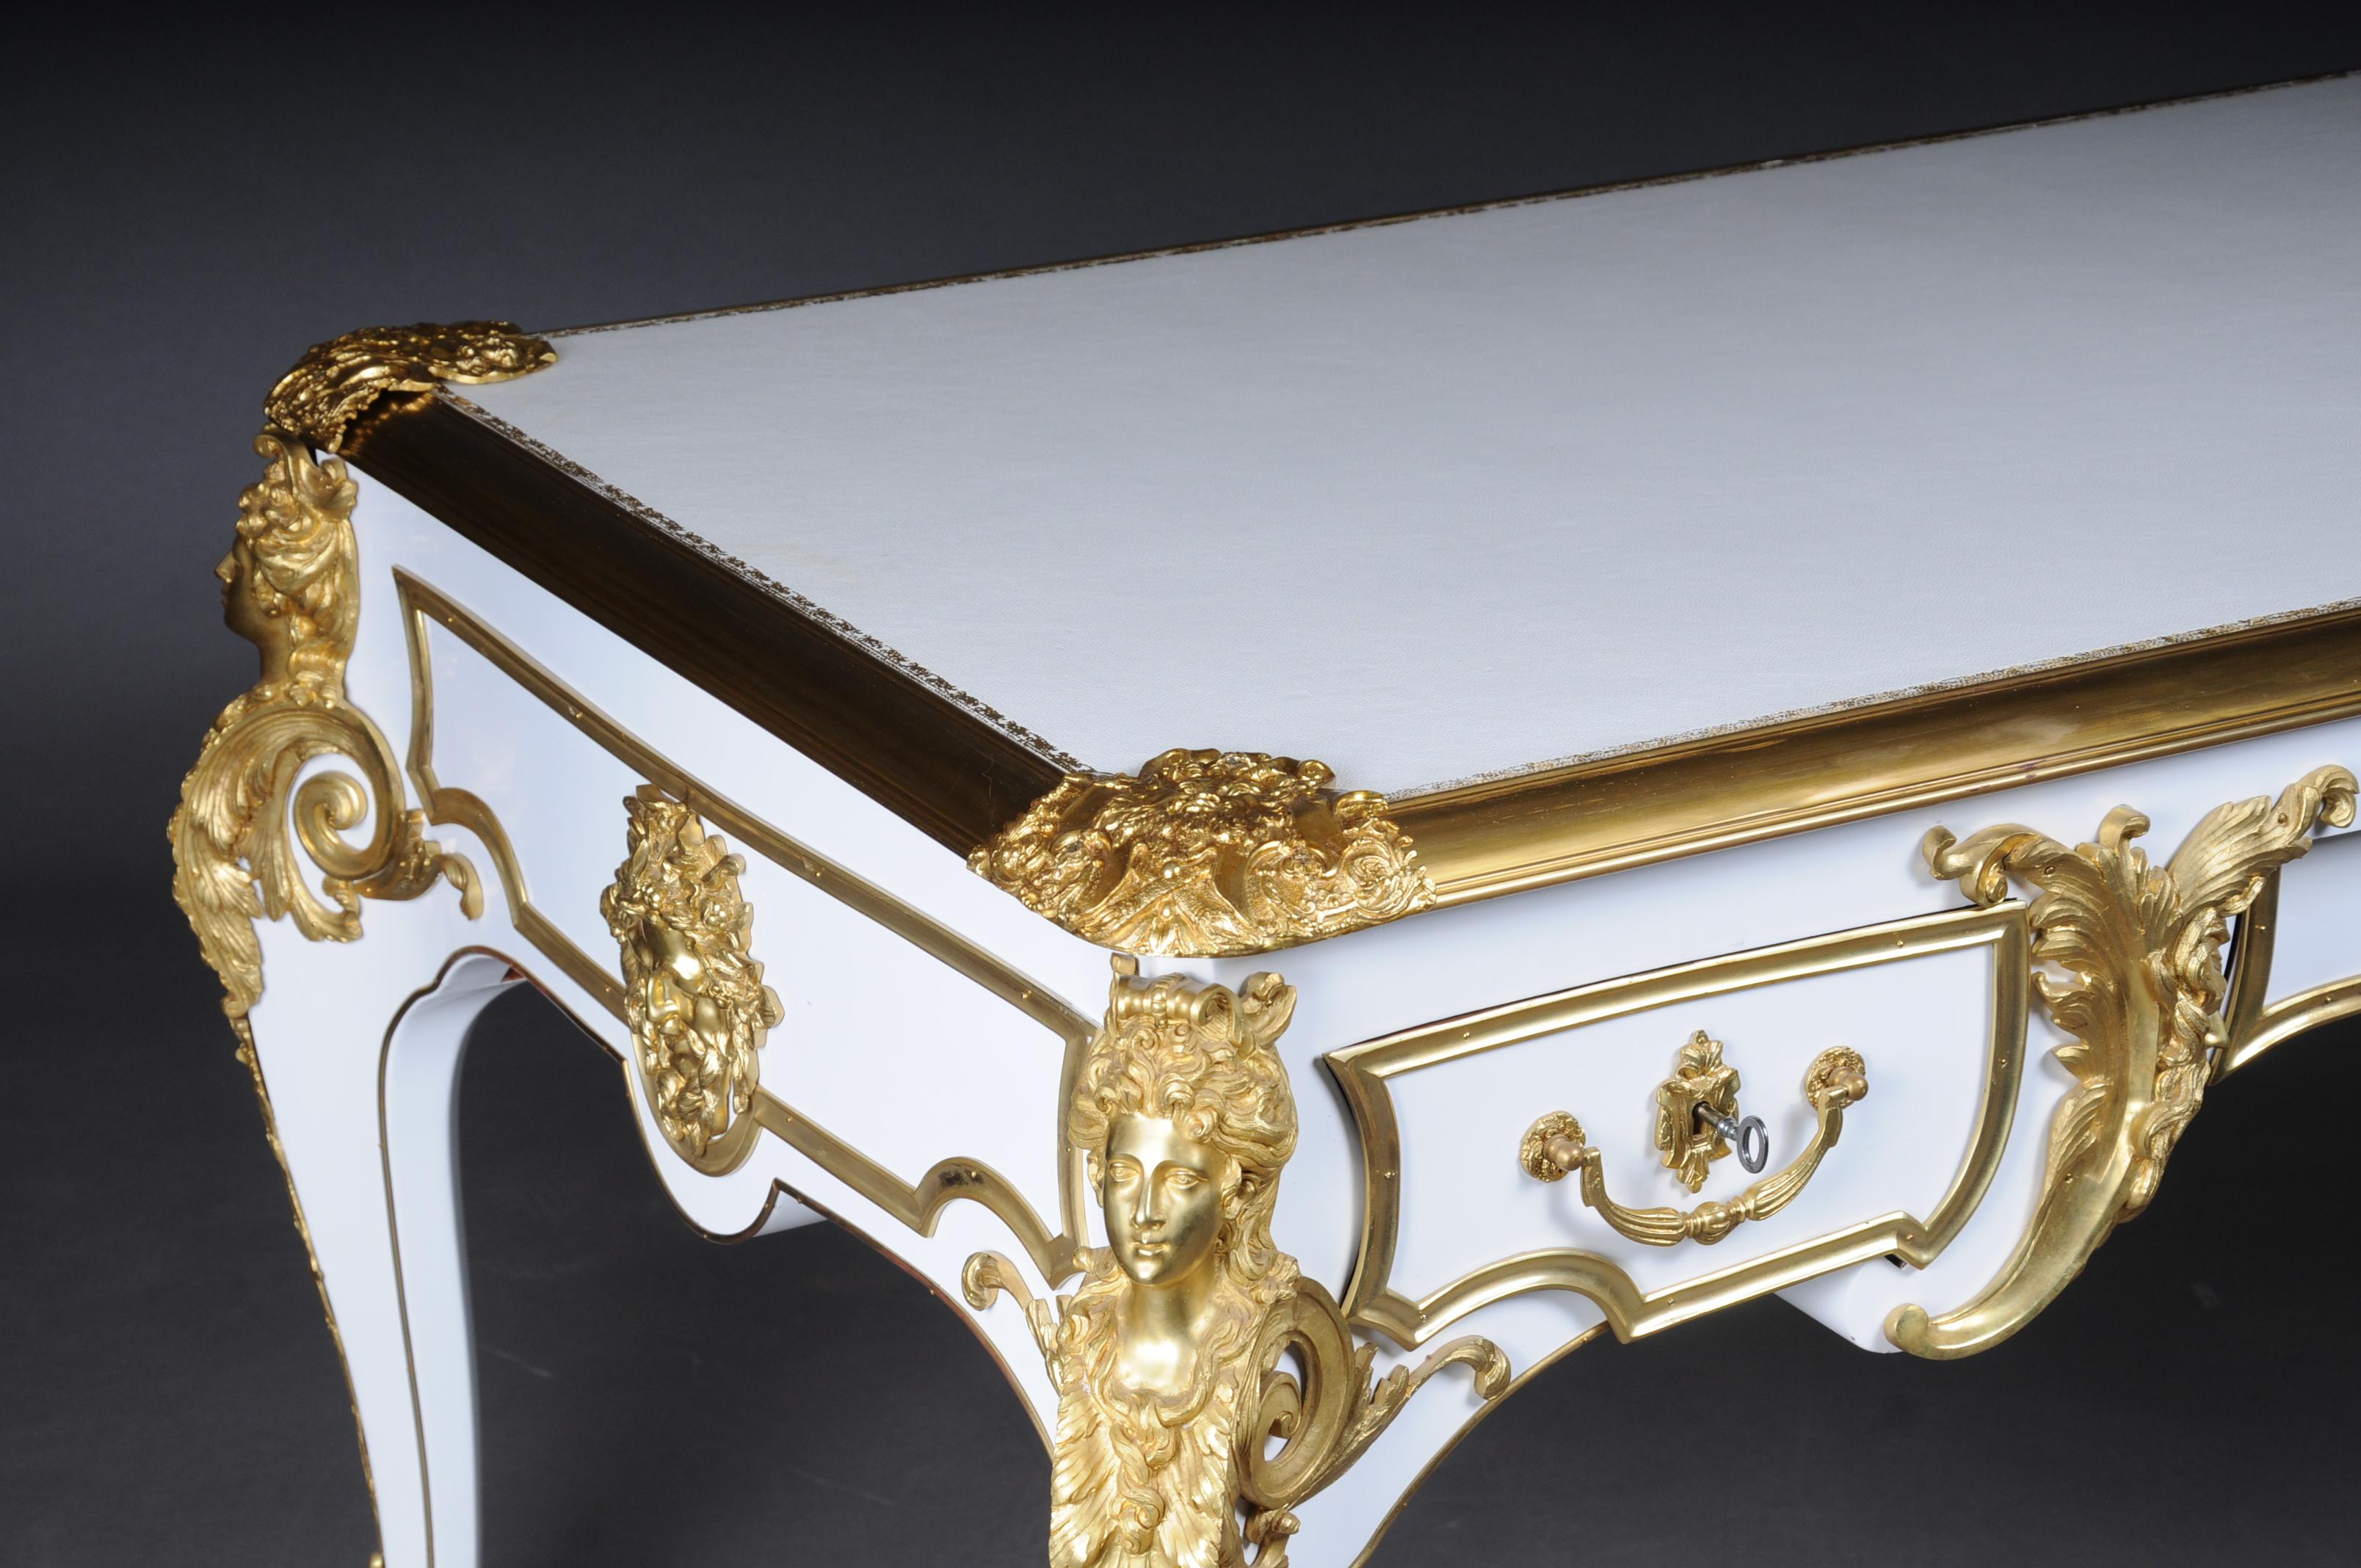 20th Century Bureau Plat/Desk high gloss white with gold after C. Boulle In Good Condition For Sale In Berlin, DE